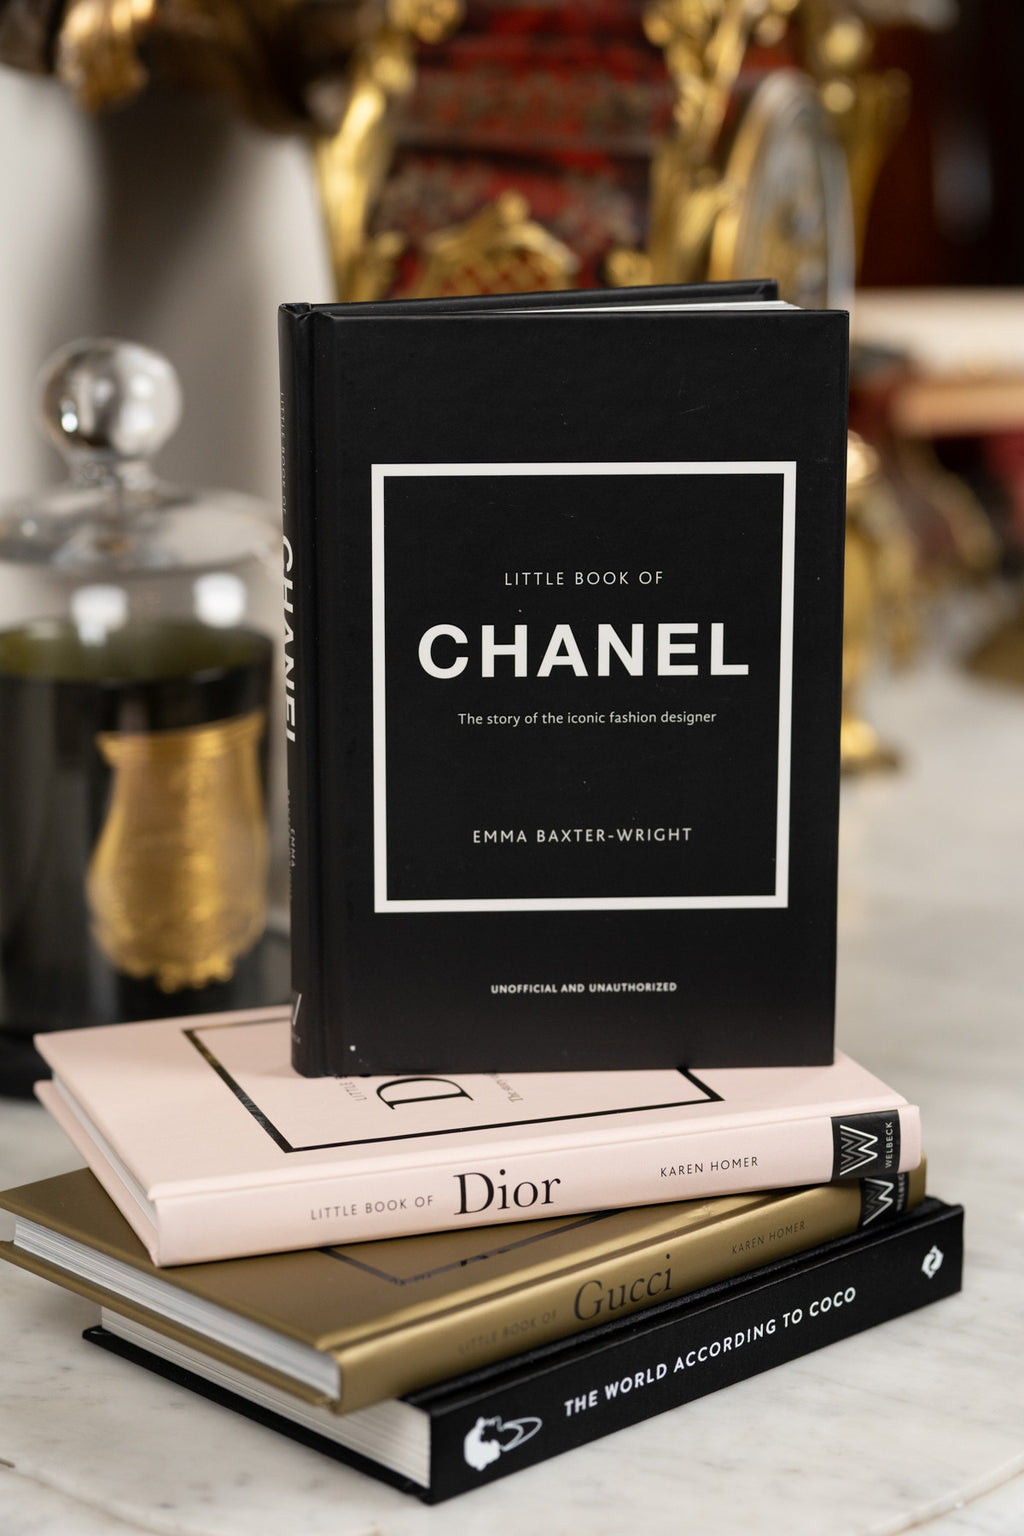 The Little Book of Chanel by Emma Baxter-Wright Hardcover